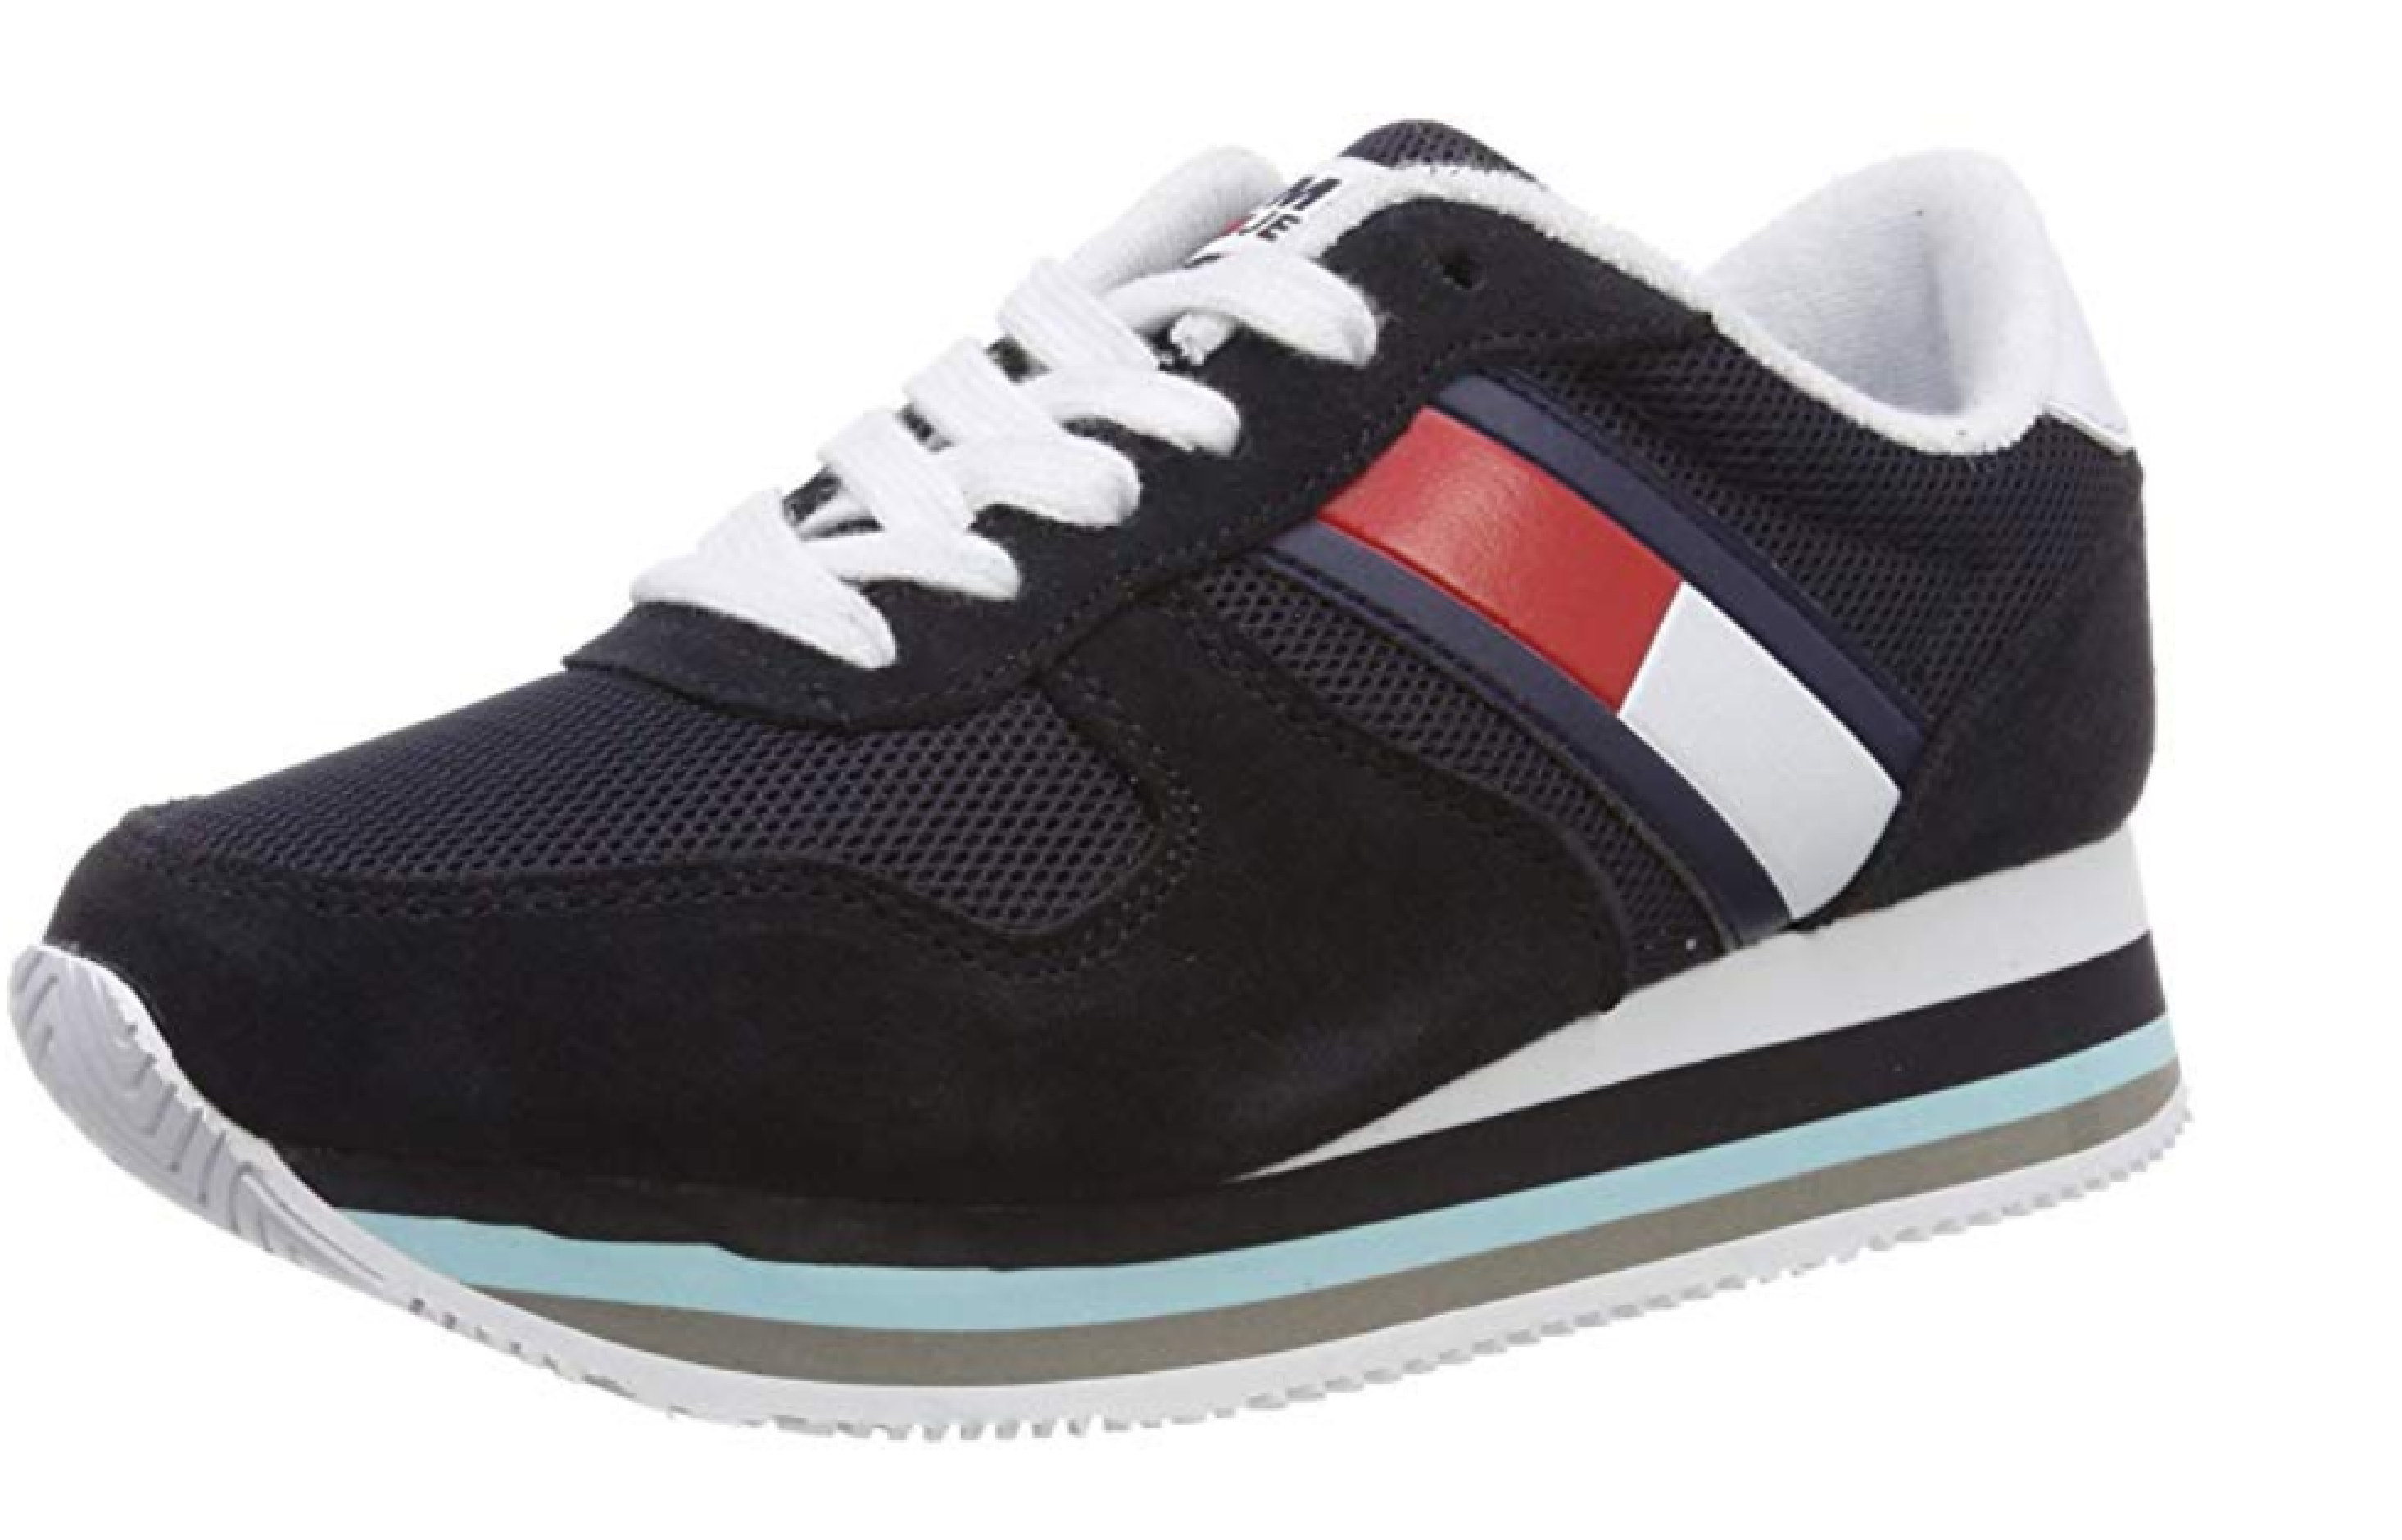 Zapatillas Tommy Jeans para mujer solo 52,9€